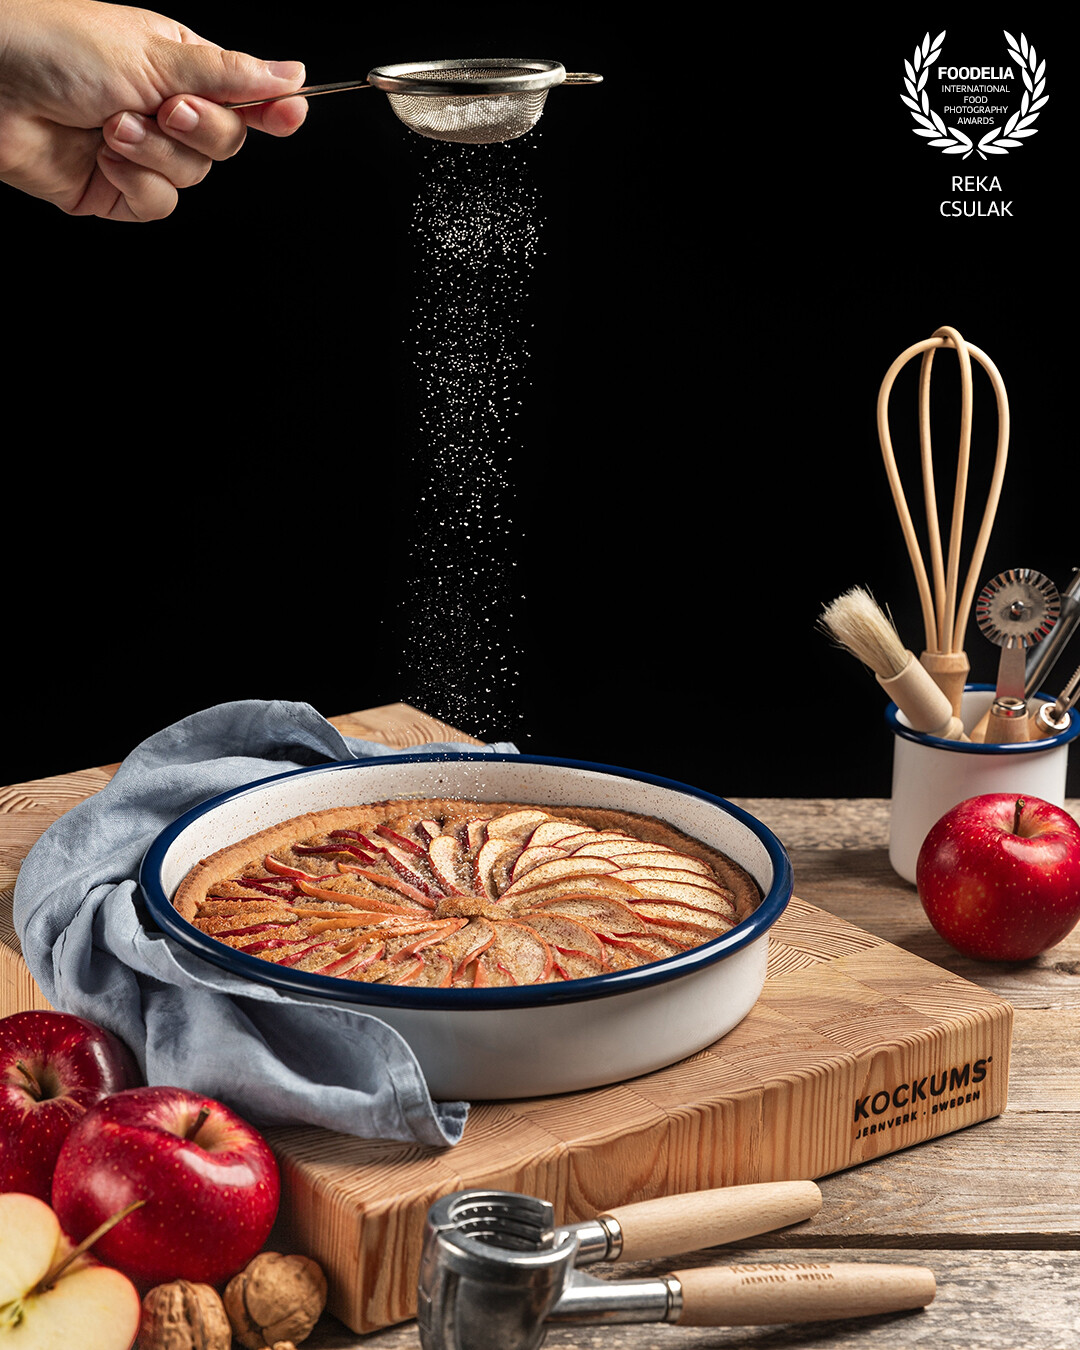 Icing sugar action over that delicious apple pie, captured for the brand's newly launched pie pan collection.